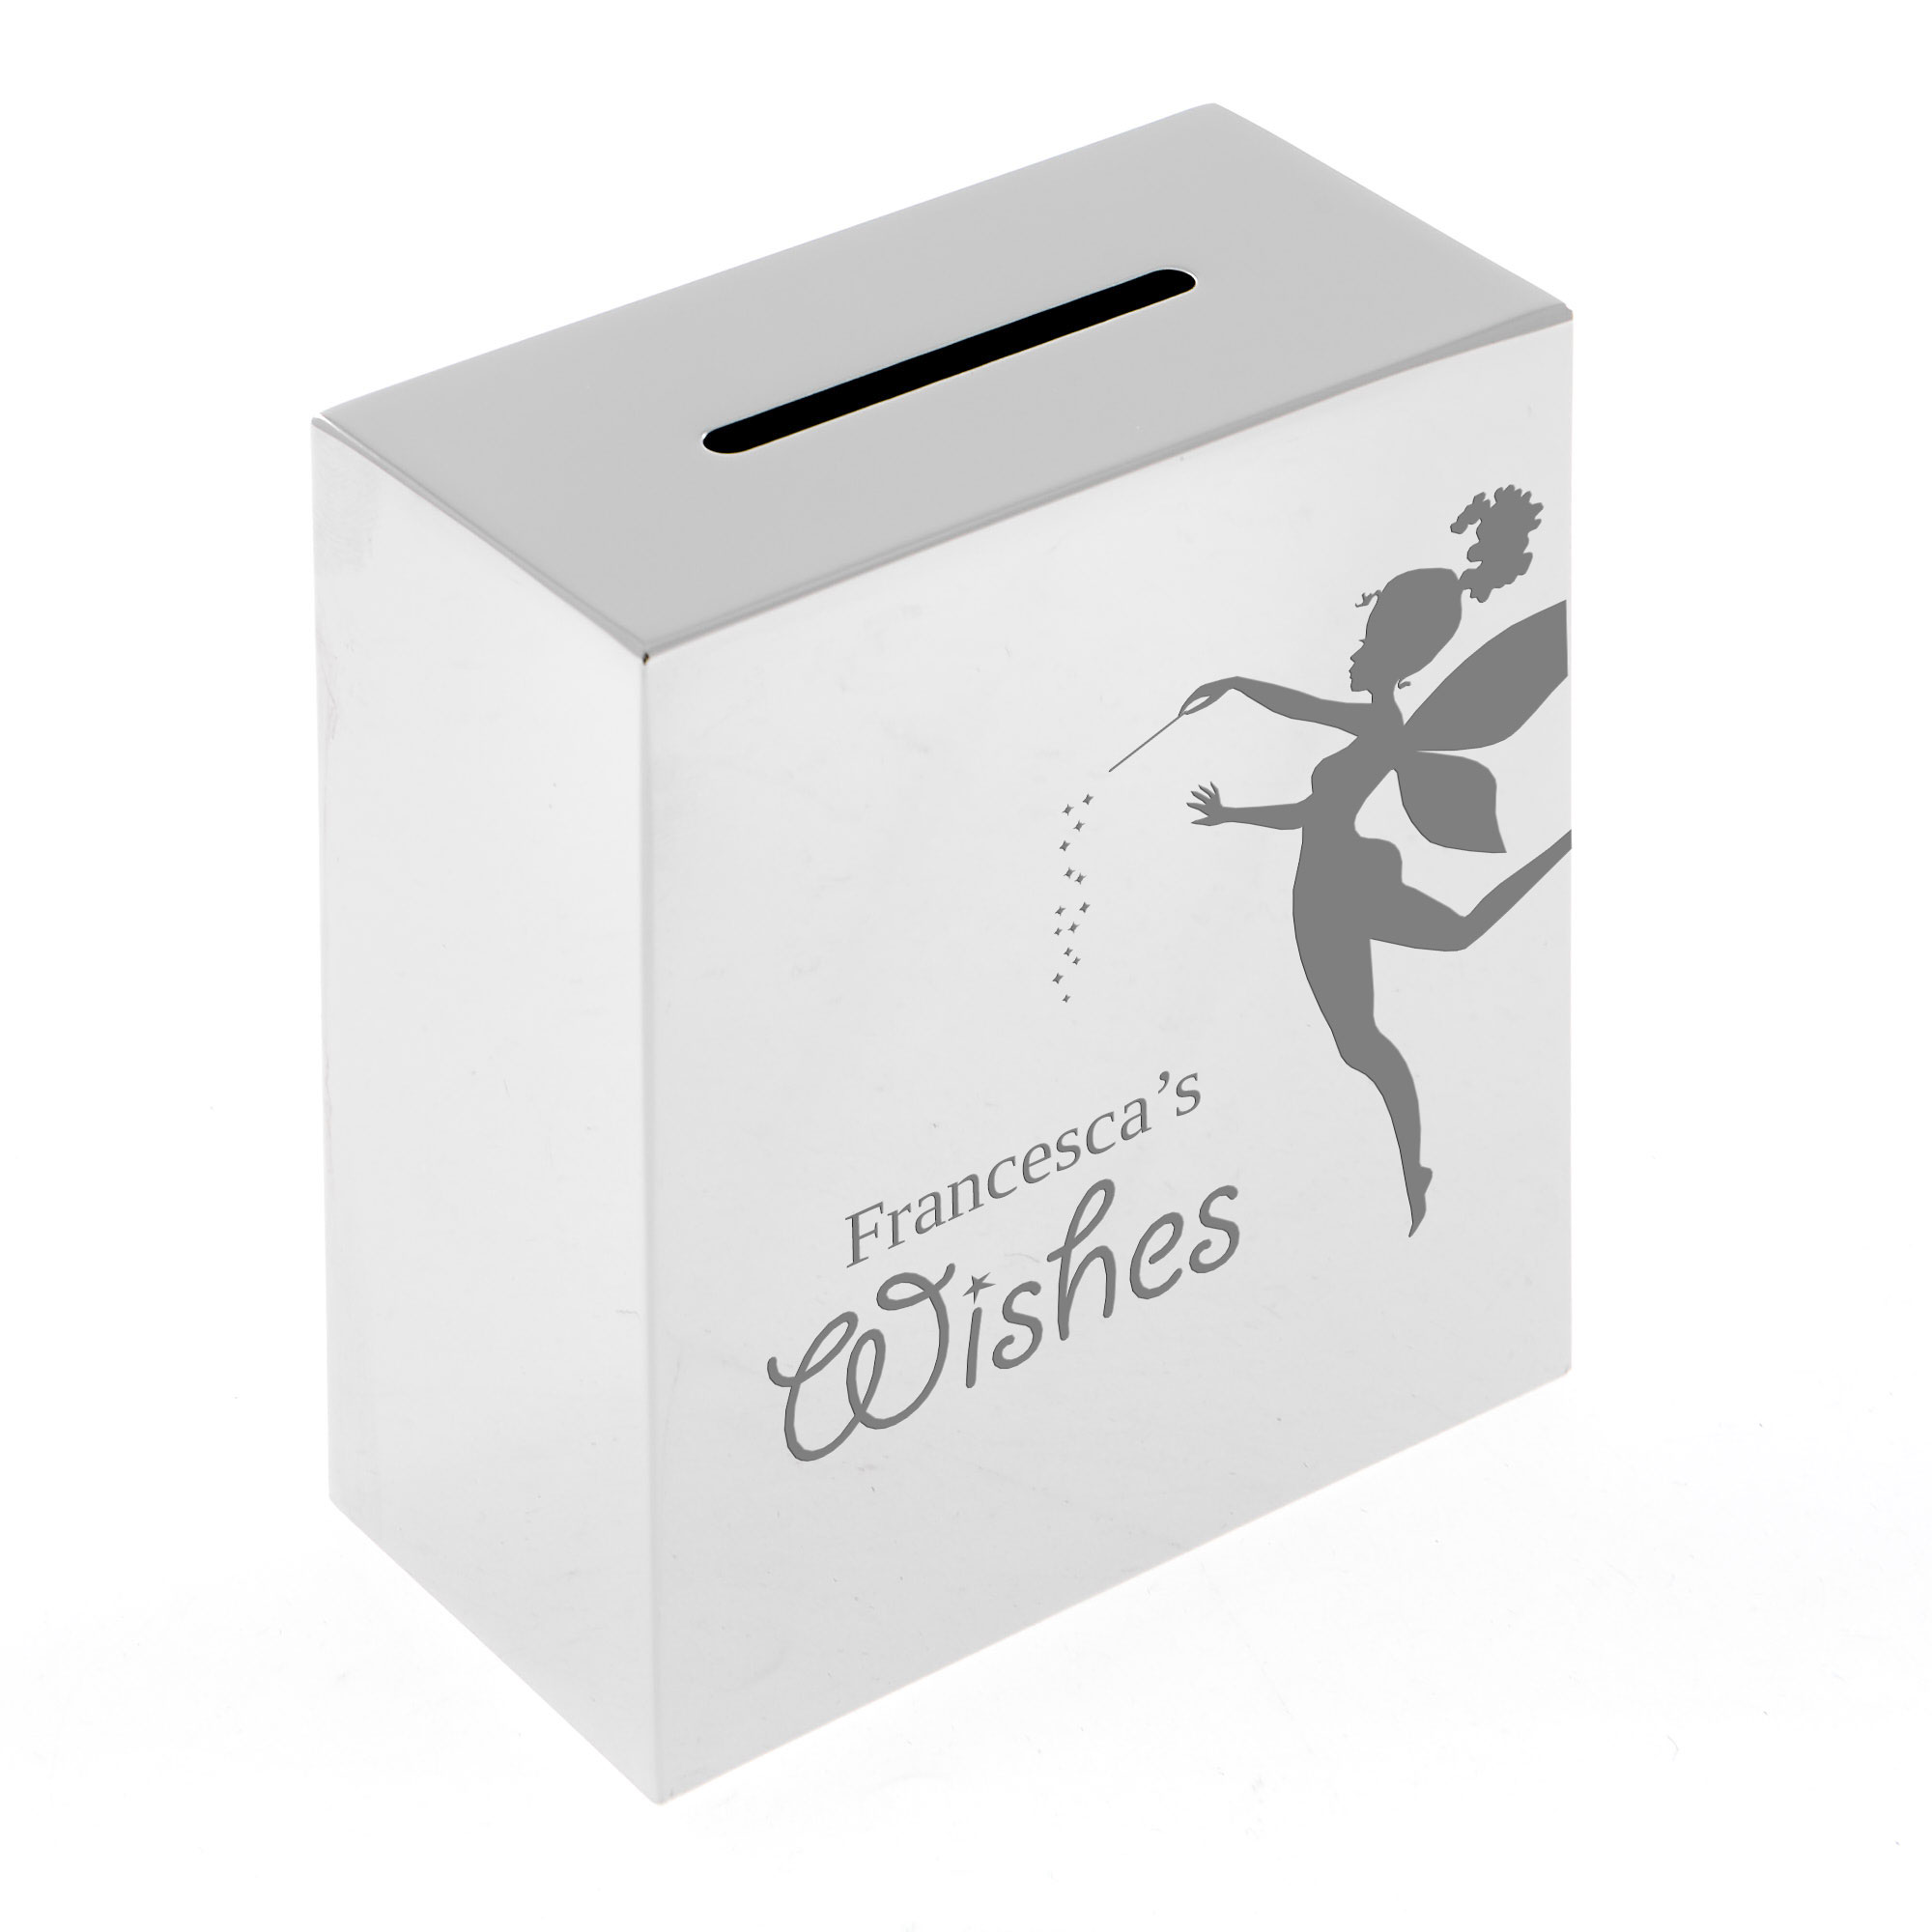 Personalised Engraved Silver Plated Money Box - Fairy Wishes